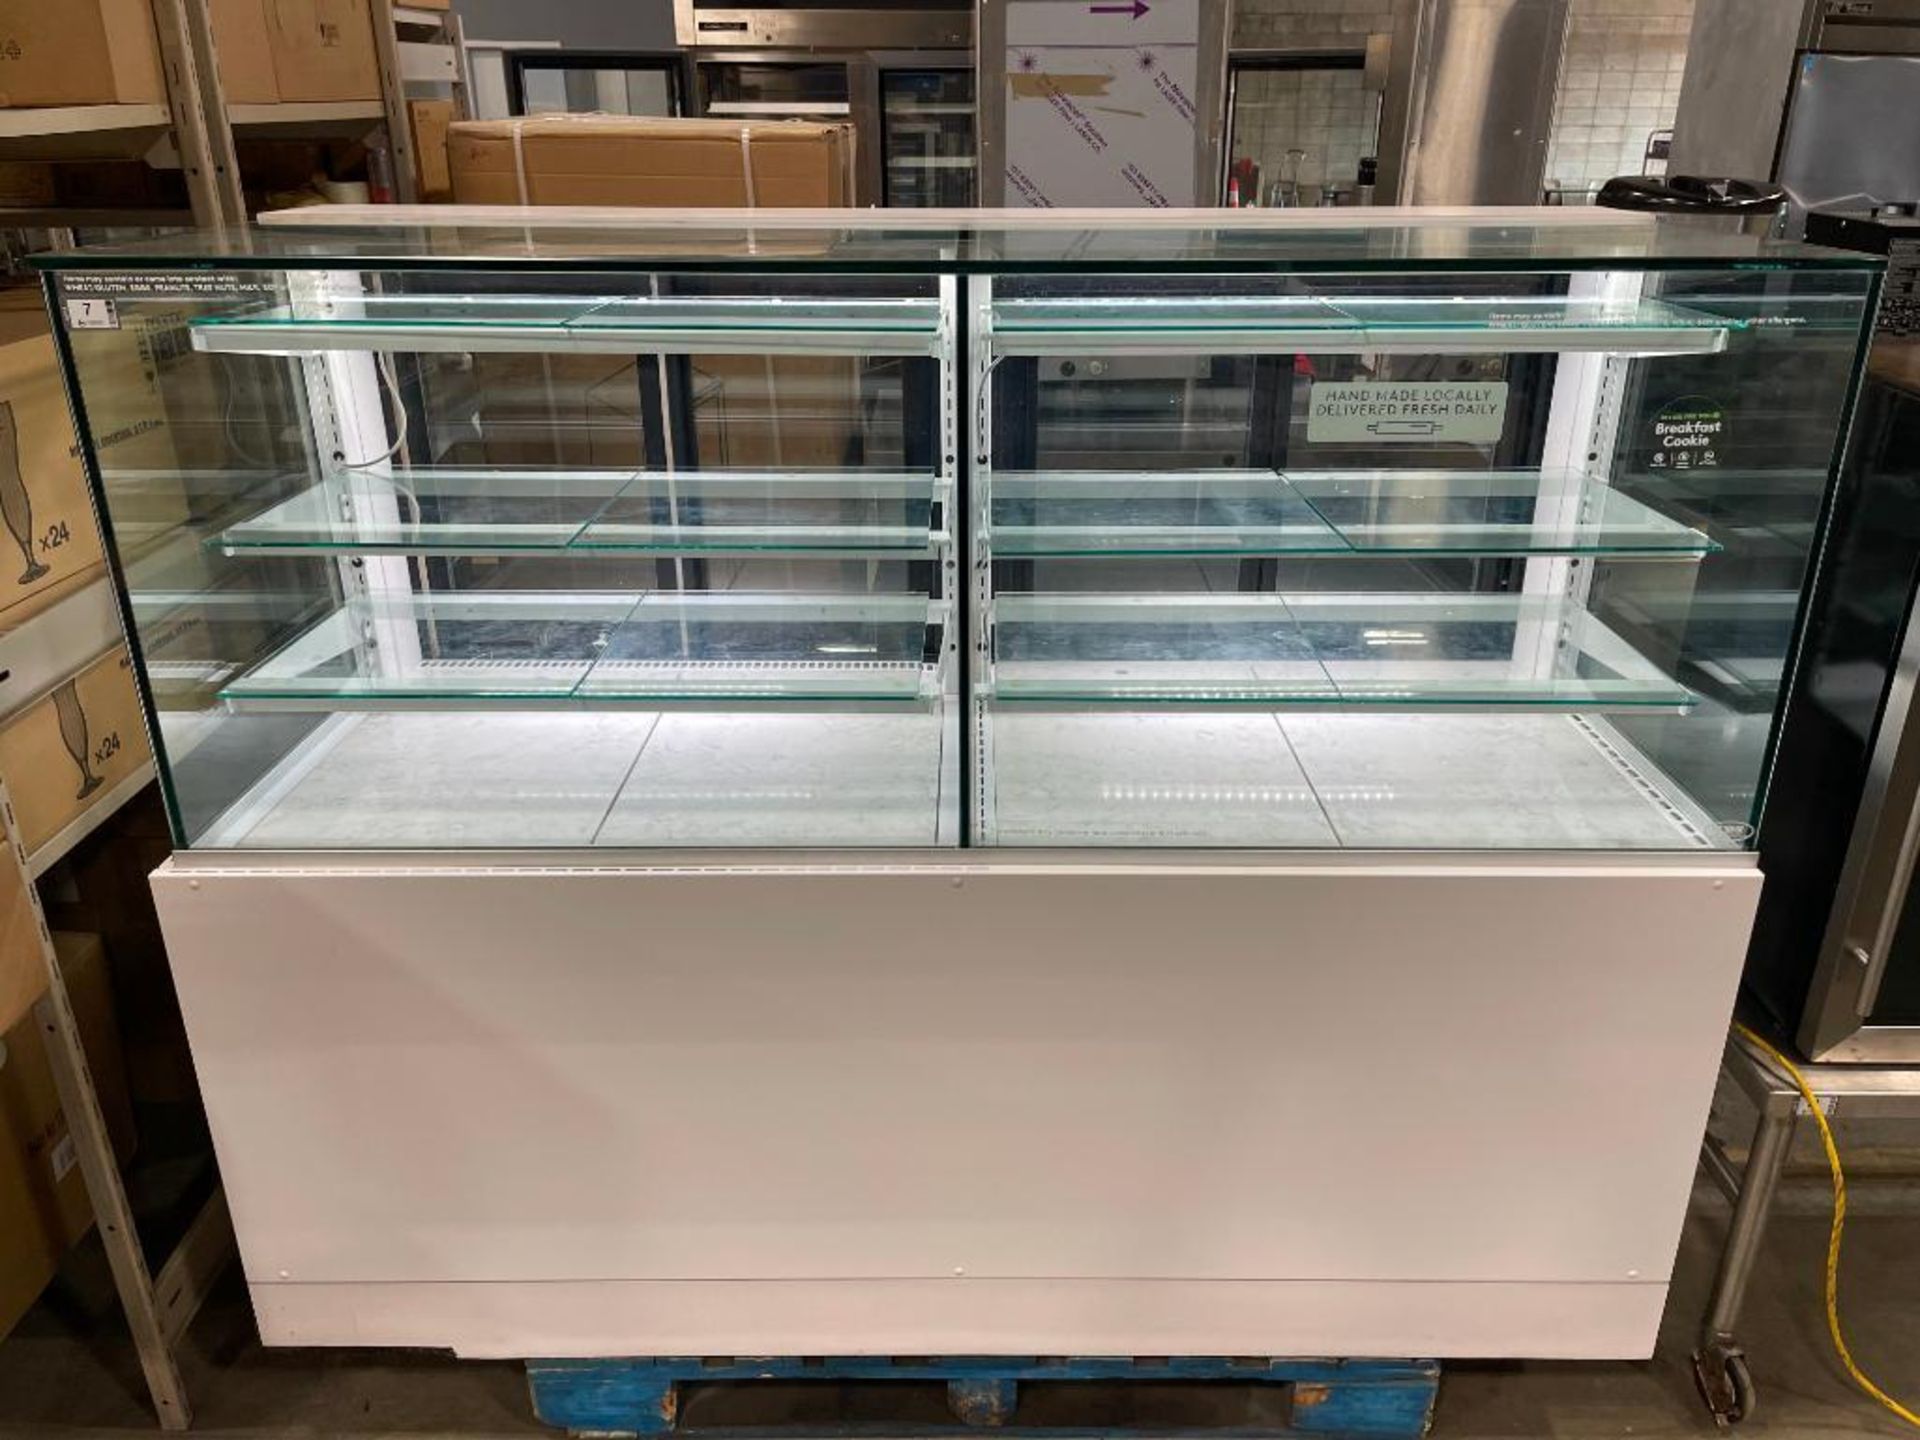 CANADIAN DISPLAY SYSTEMS SQRD6 72" REFRIGERATED DISPLAY CASE - Image 23 of 23